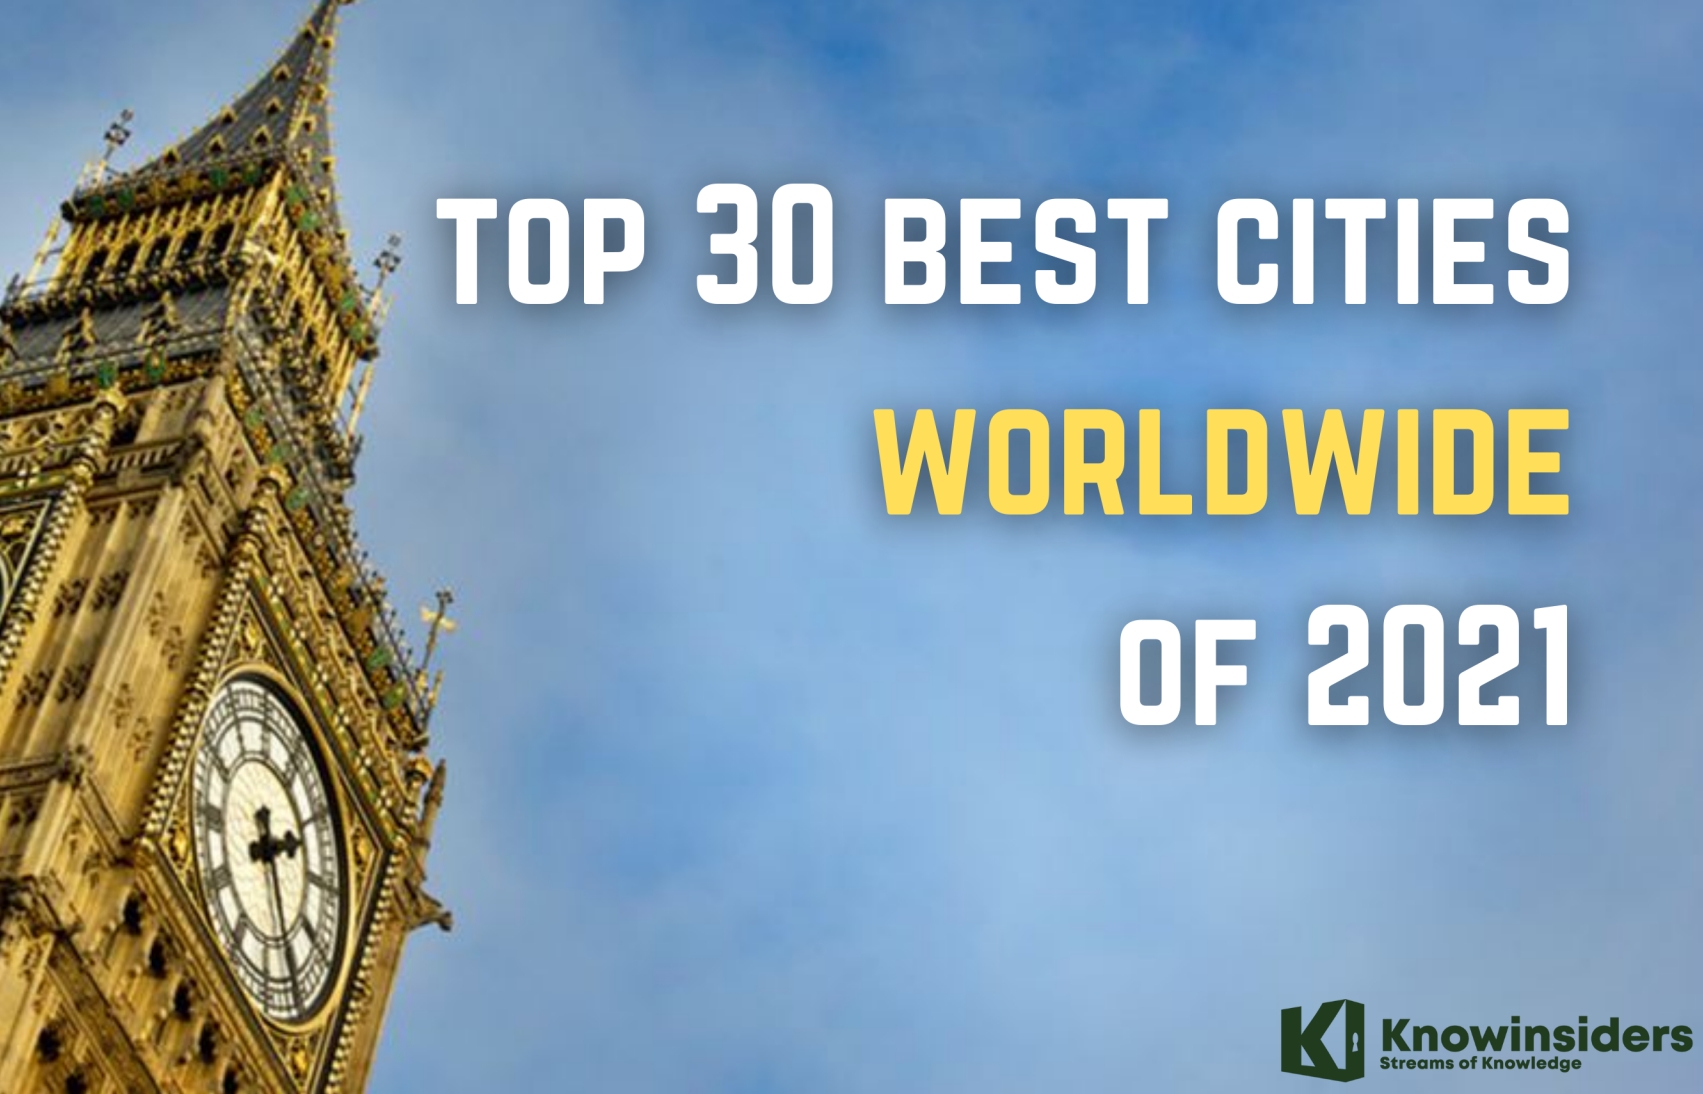 Top 30 Best Cities in the World Today